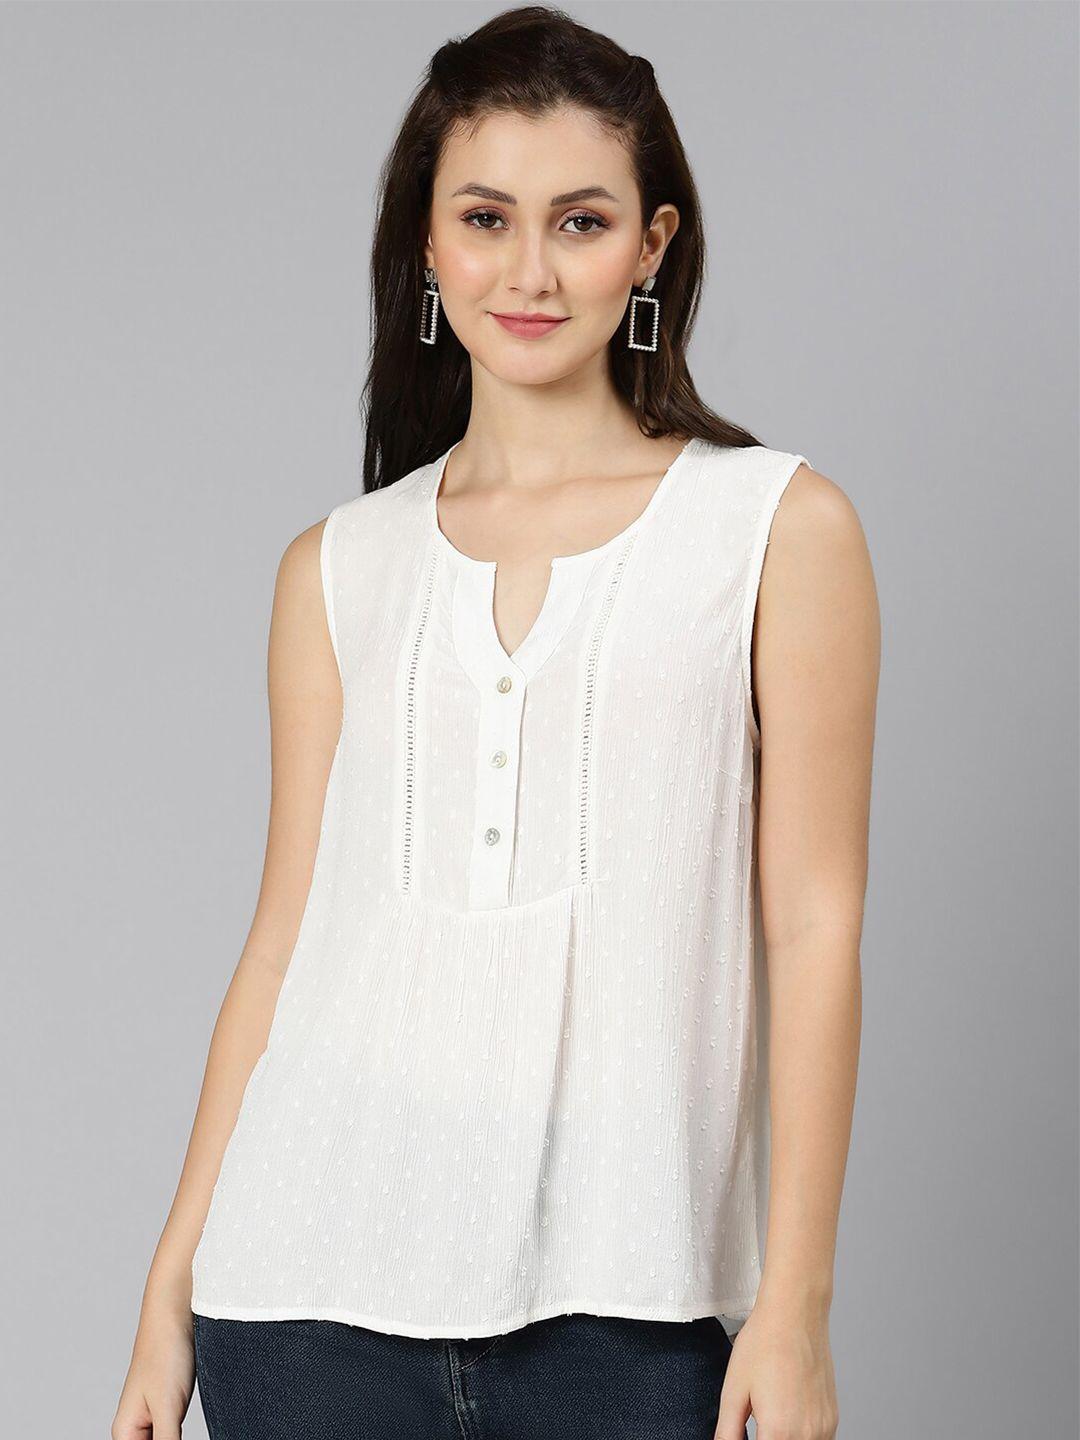 oxolloxo white solid cotton top